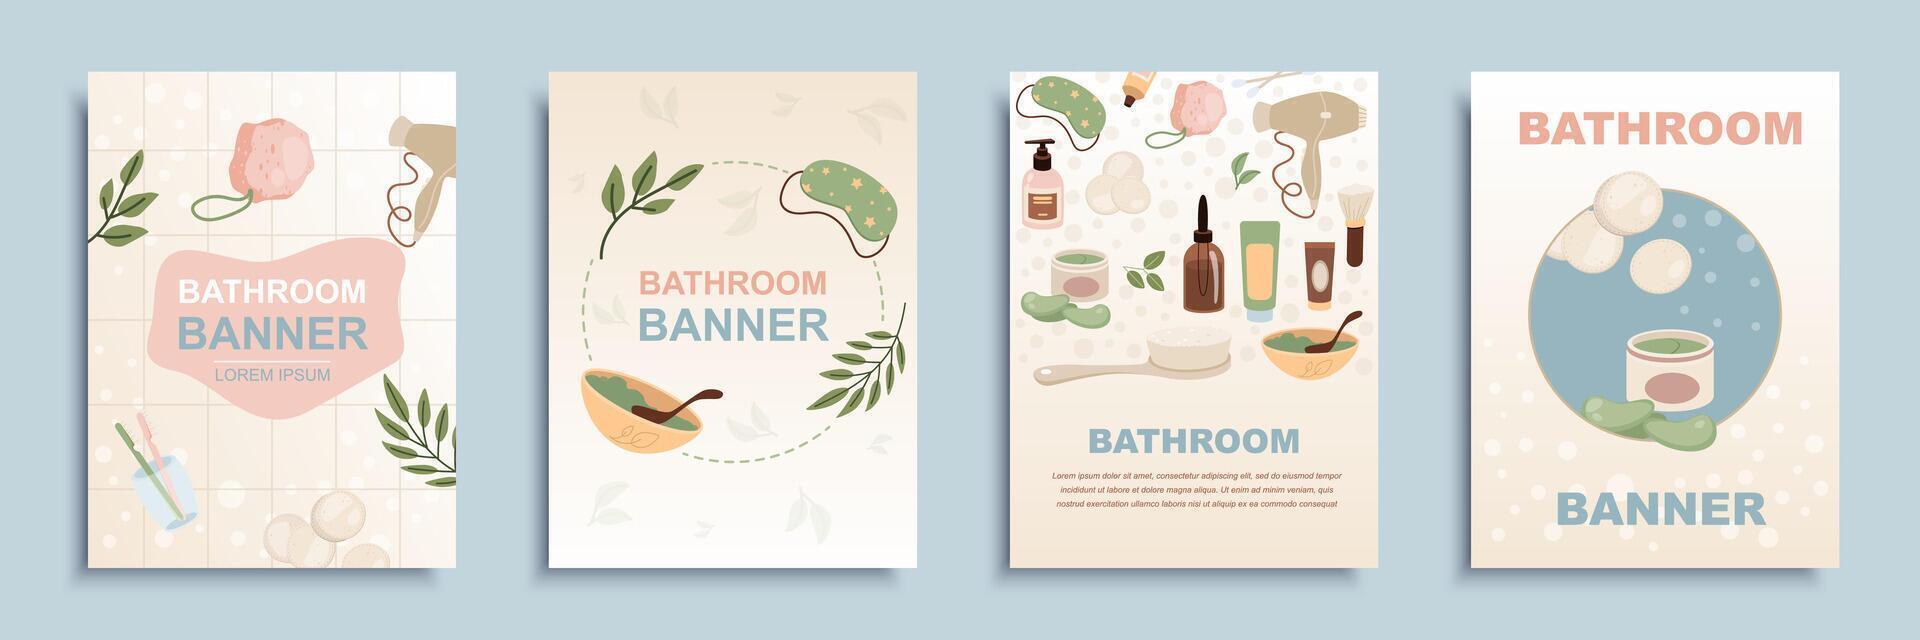 Bathroom cover brochure set in flat design. Poster templates with different cosmetics for skincare, hair care tools, creams and lotions bottles with natural organic ingredients. Vector illustration.